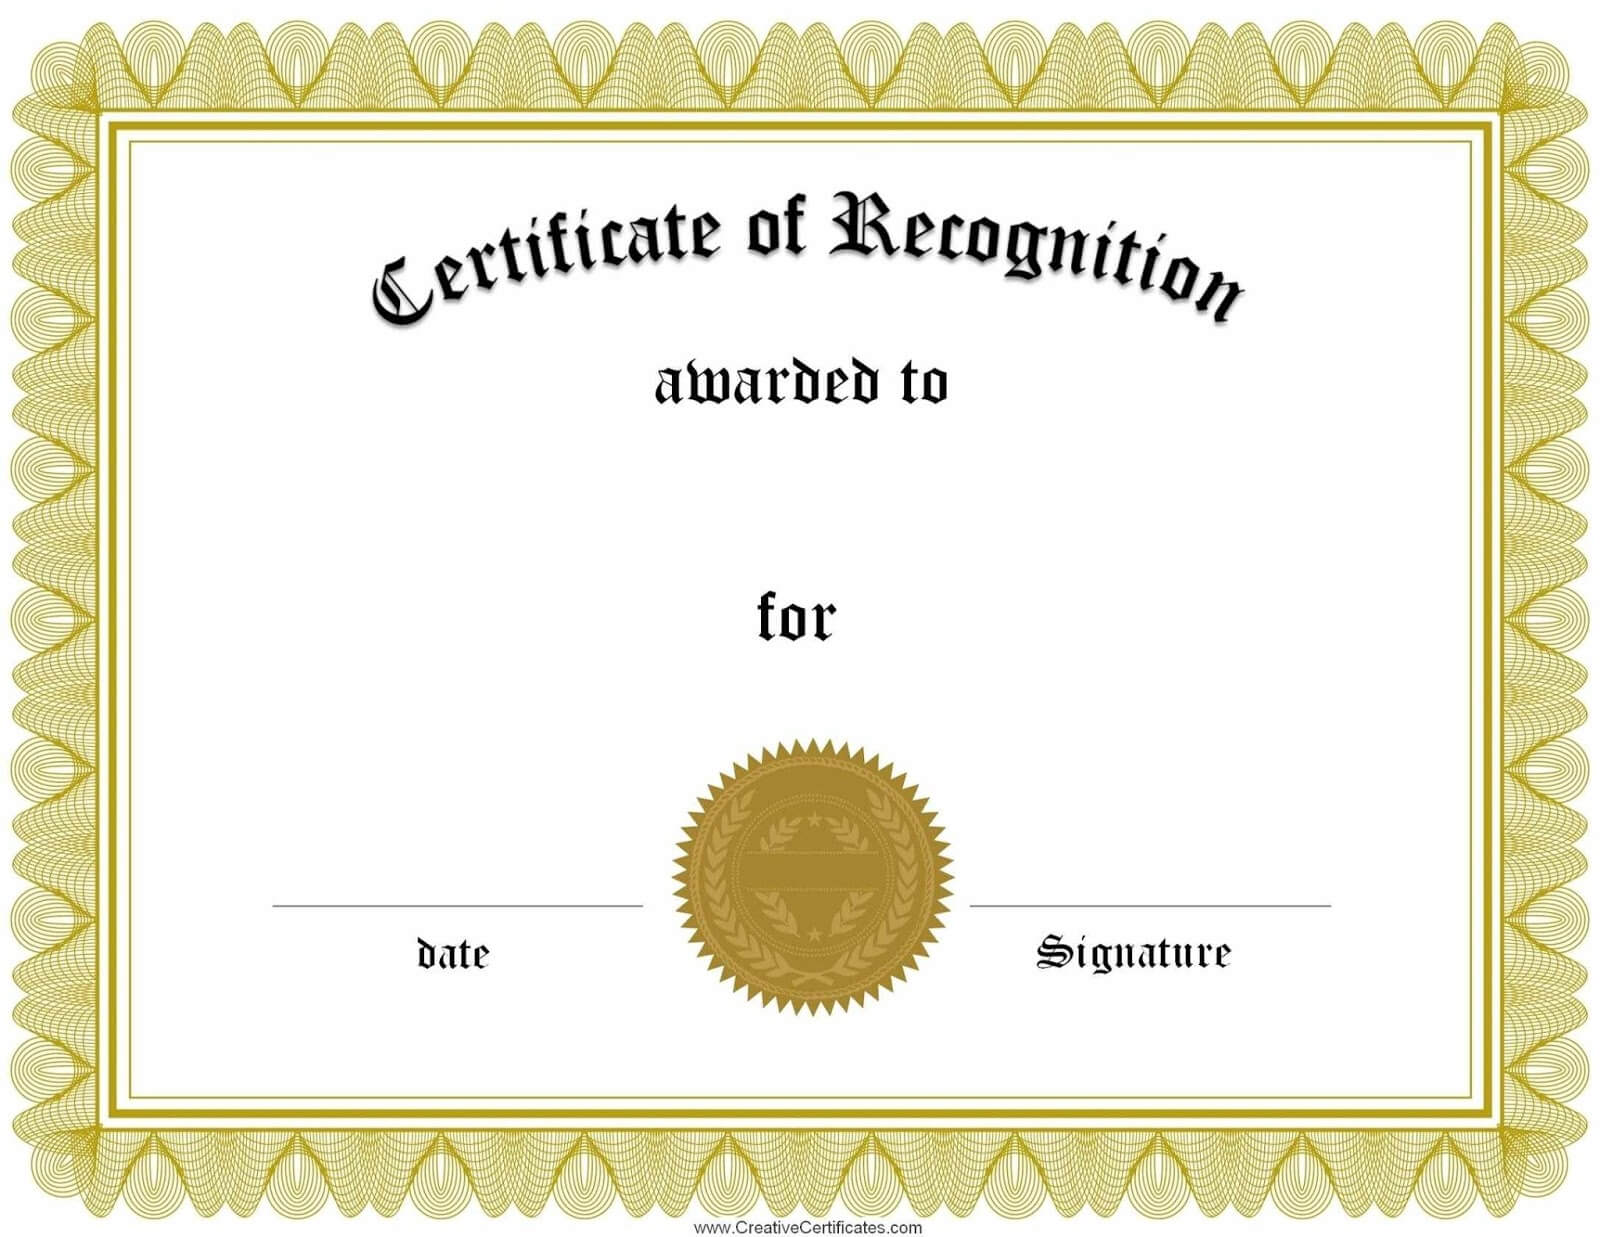 Sample Certificate Of Recognition Templates | Sample Certificate Within Sample Certificate Of Recognition Template